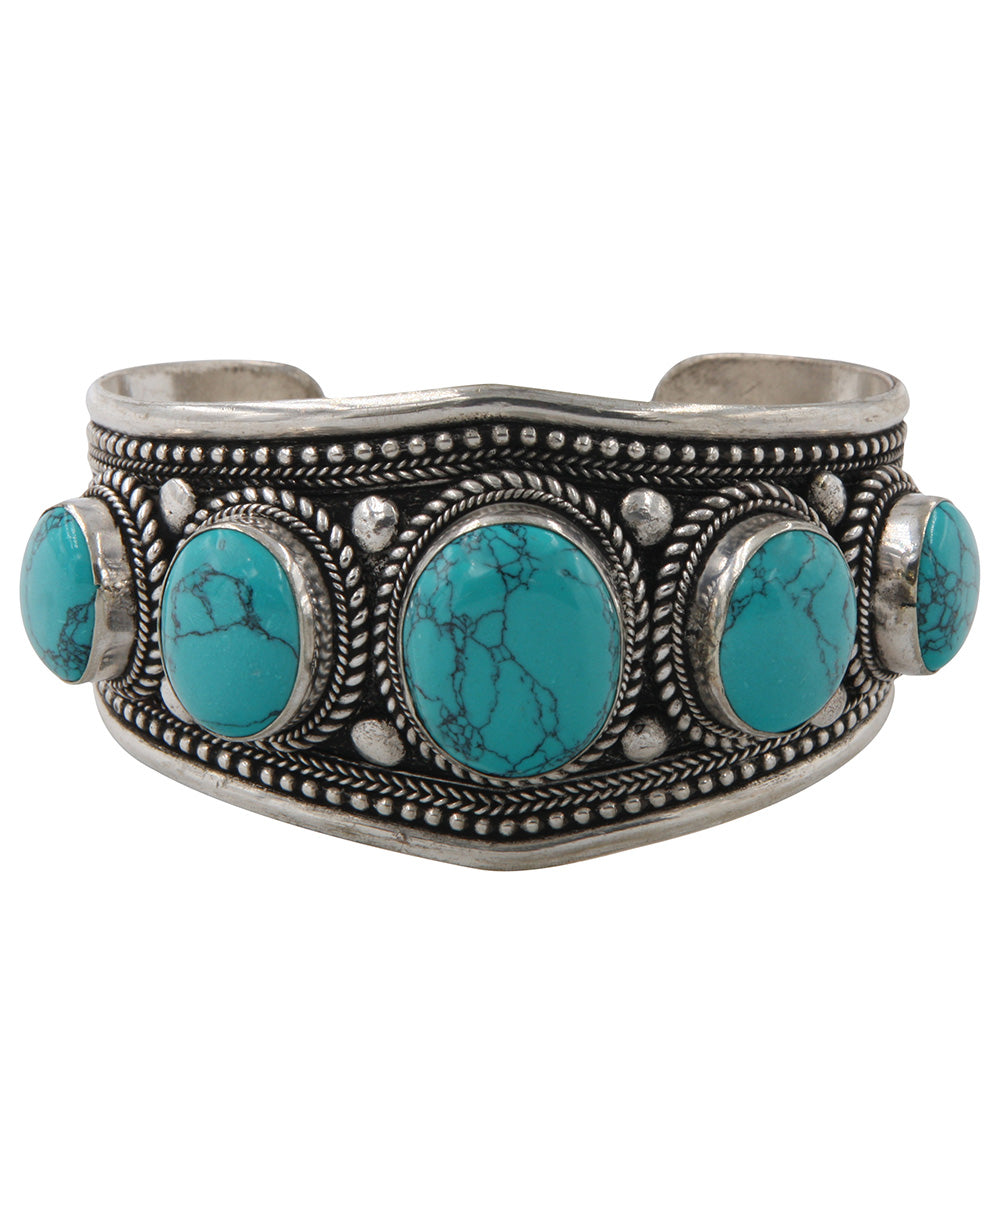 Ornate Tibetan Quintuple Cuff with Turquoise